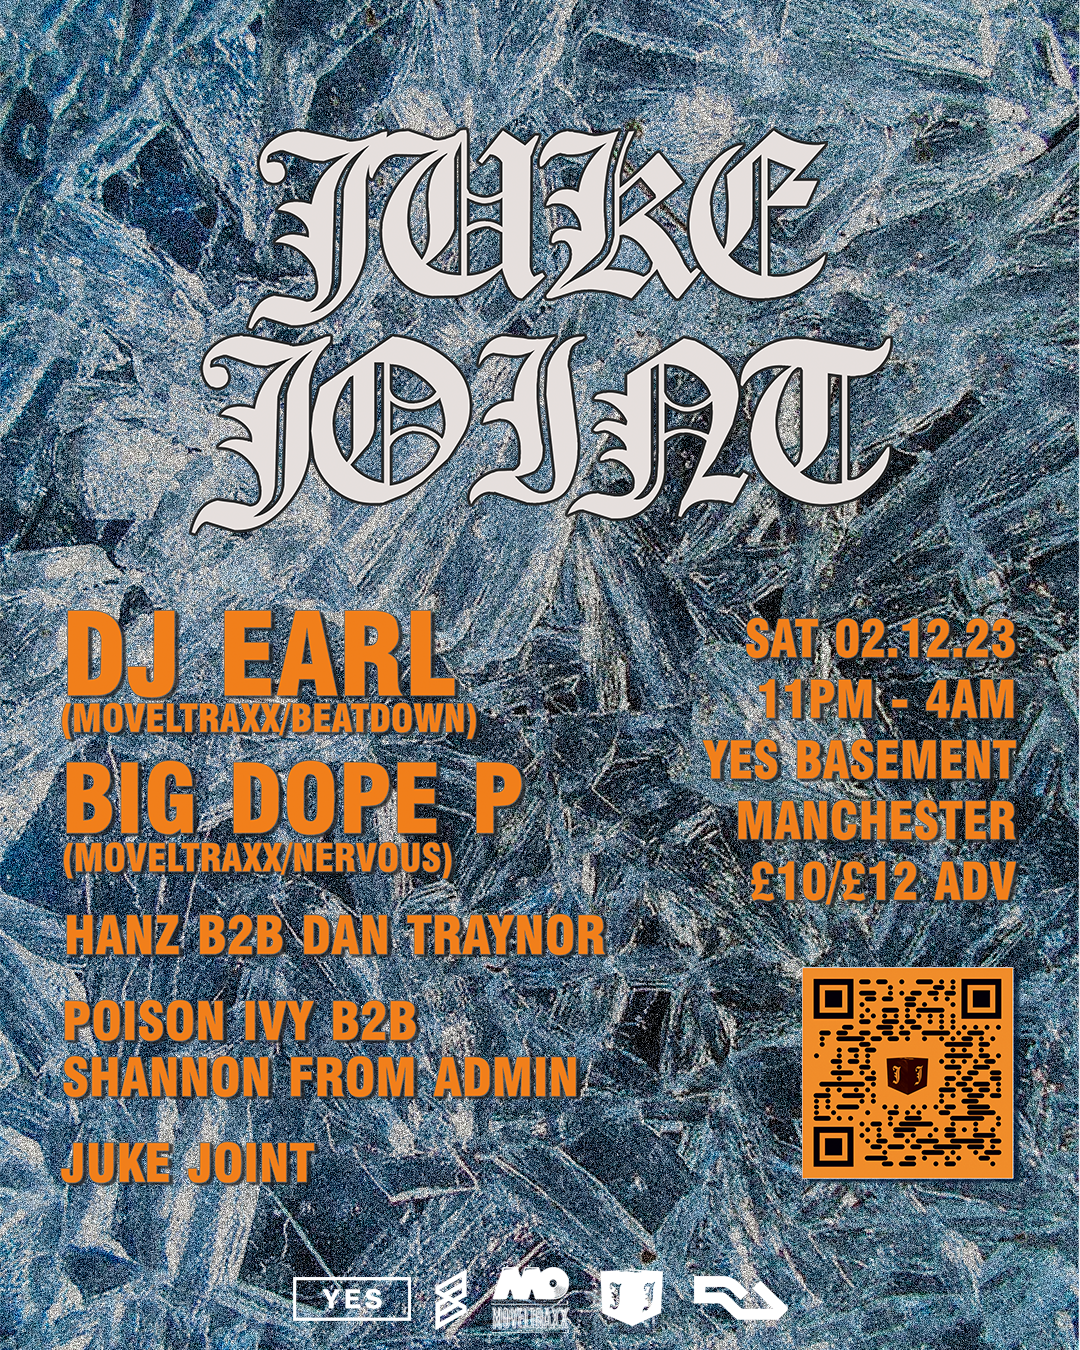 Juke Joint with DJ Earl & Big Dope P - フライヤー表